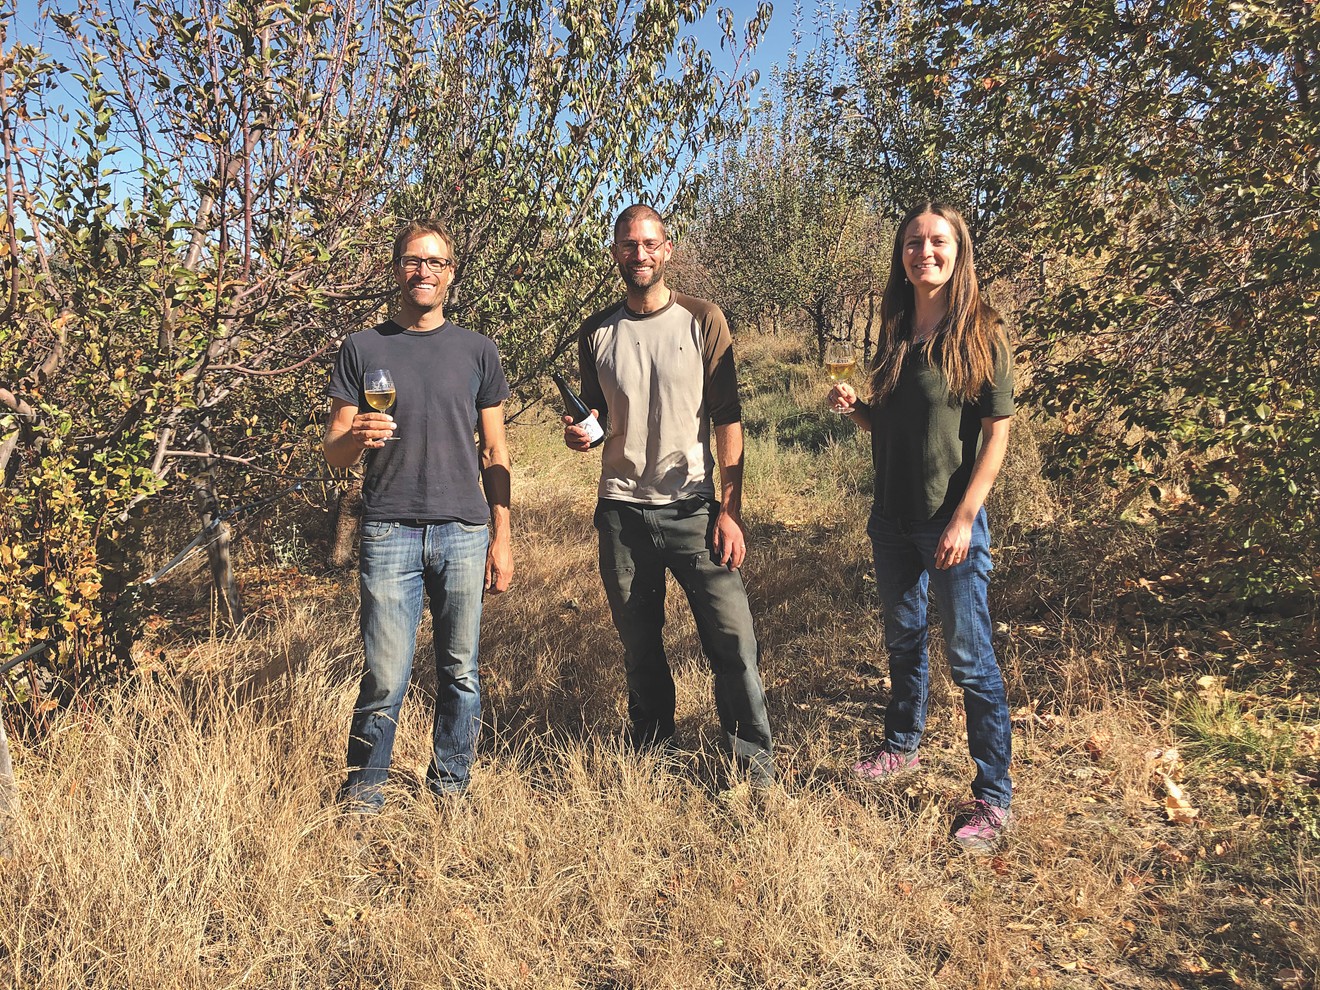 Three of Stoic Cider's co-founders: Kanin, Cody, and Tierney Routson. (Not pictured: co-founder Clare Stielstra.)